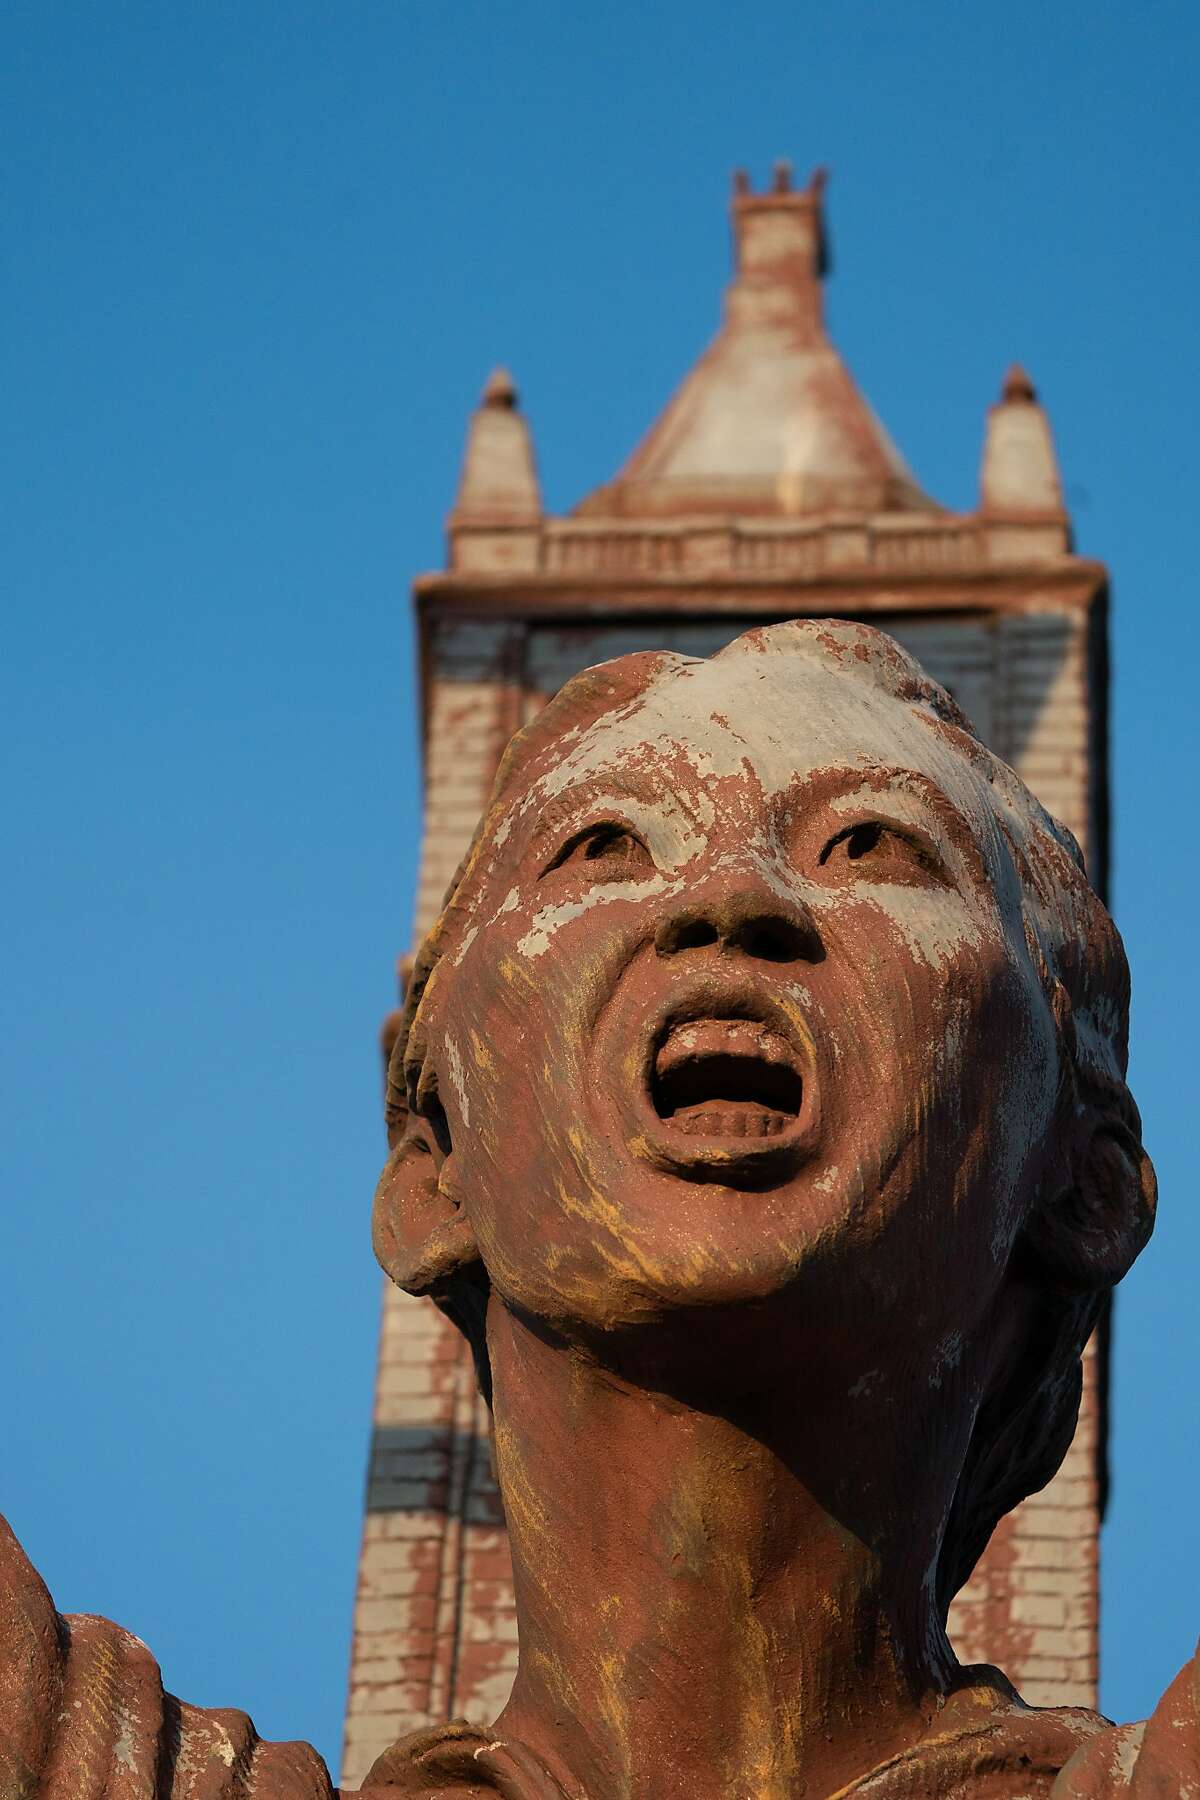 Close up of one of the "Berkeley Big People" sculptures at the pedestrian bridge over Interstate 80, south of University Ave. on Sunday, Aug. 18, 2019, in Berkeley, Calif.